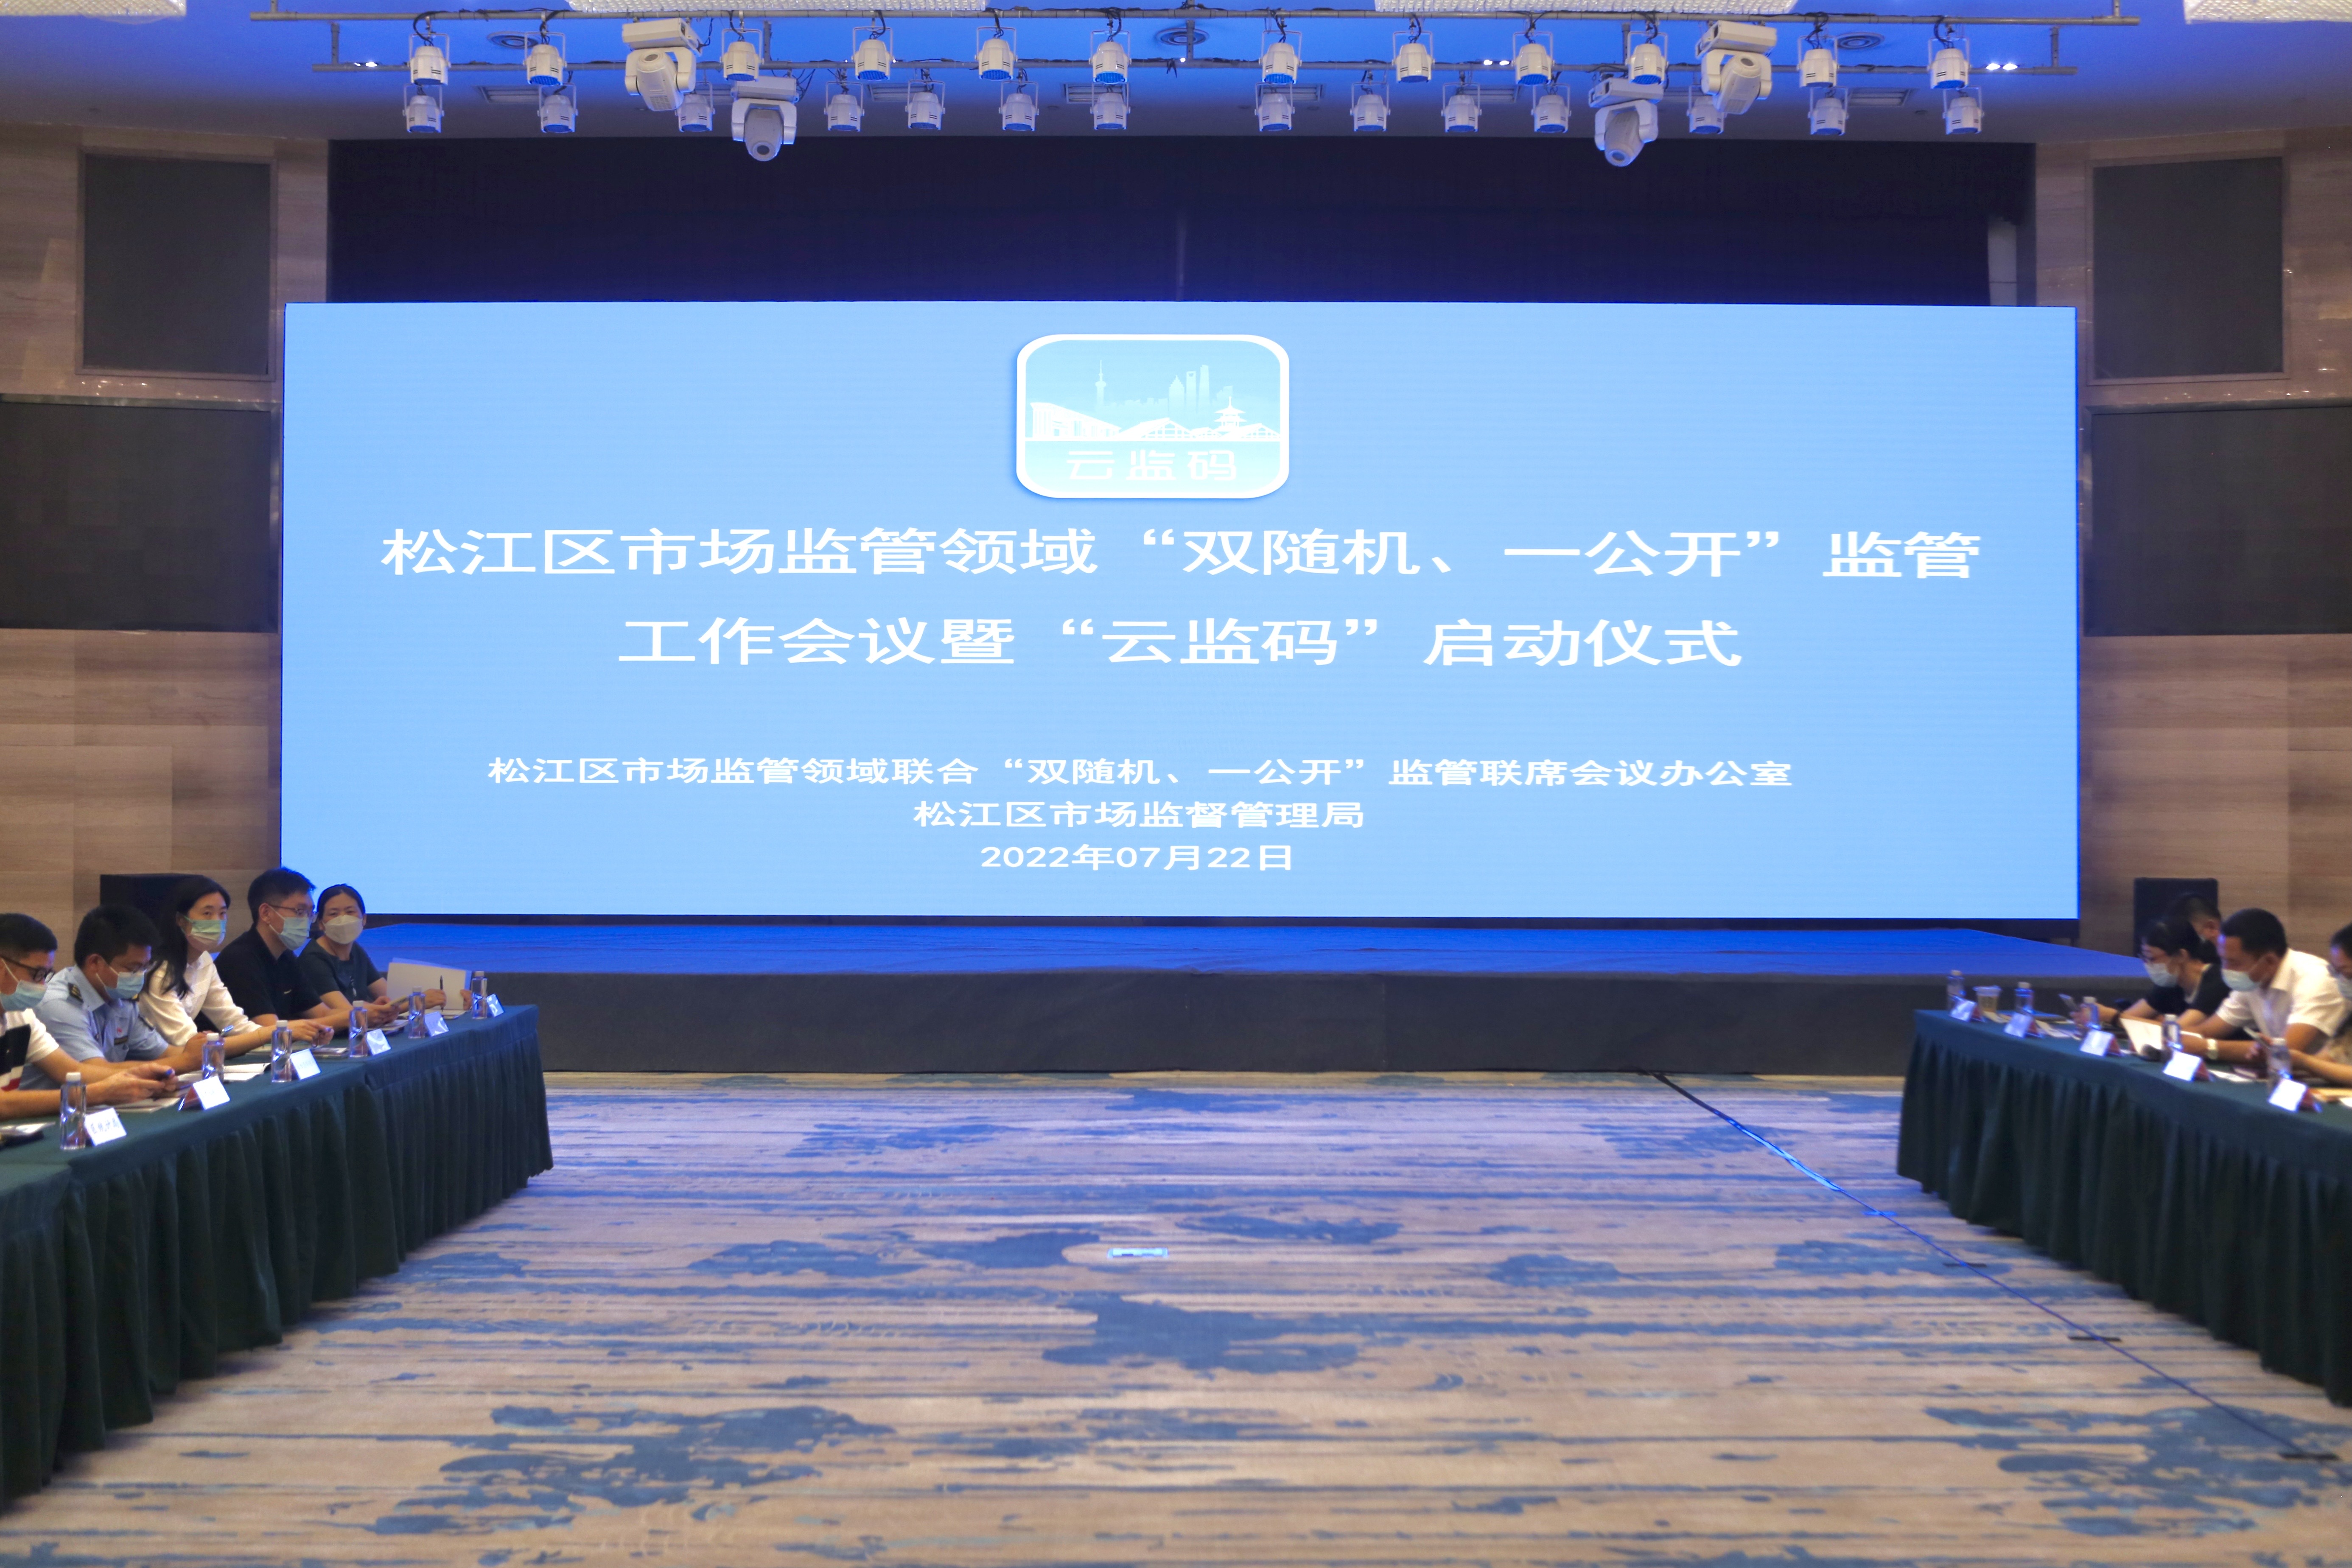 Songjiang District has continuously received national level honors and incentives, with significant results in deepening the reform of the commercial system throughout the region, departments, and departments